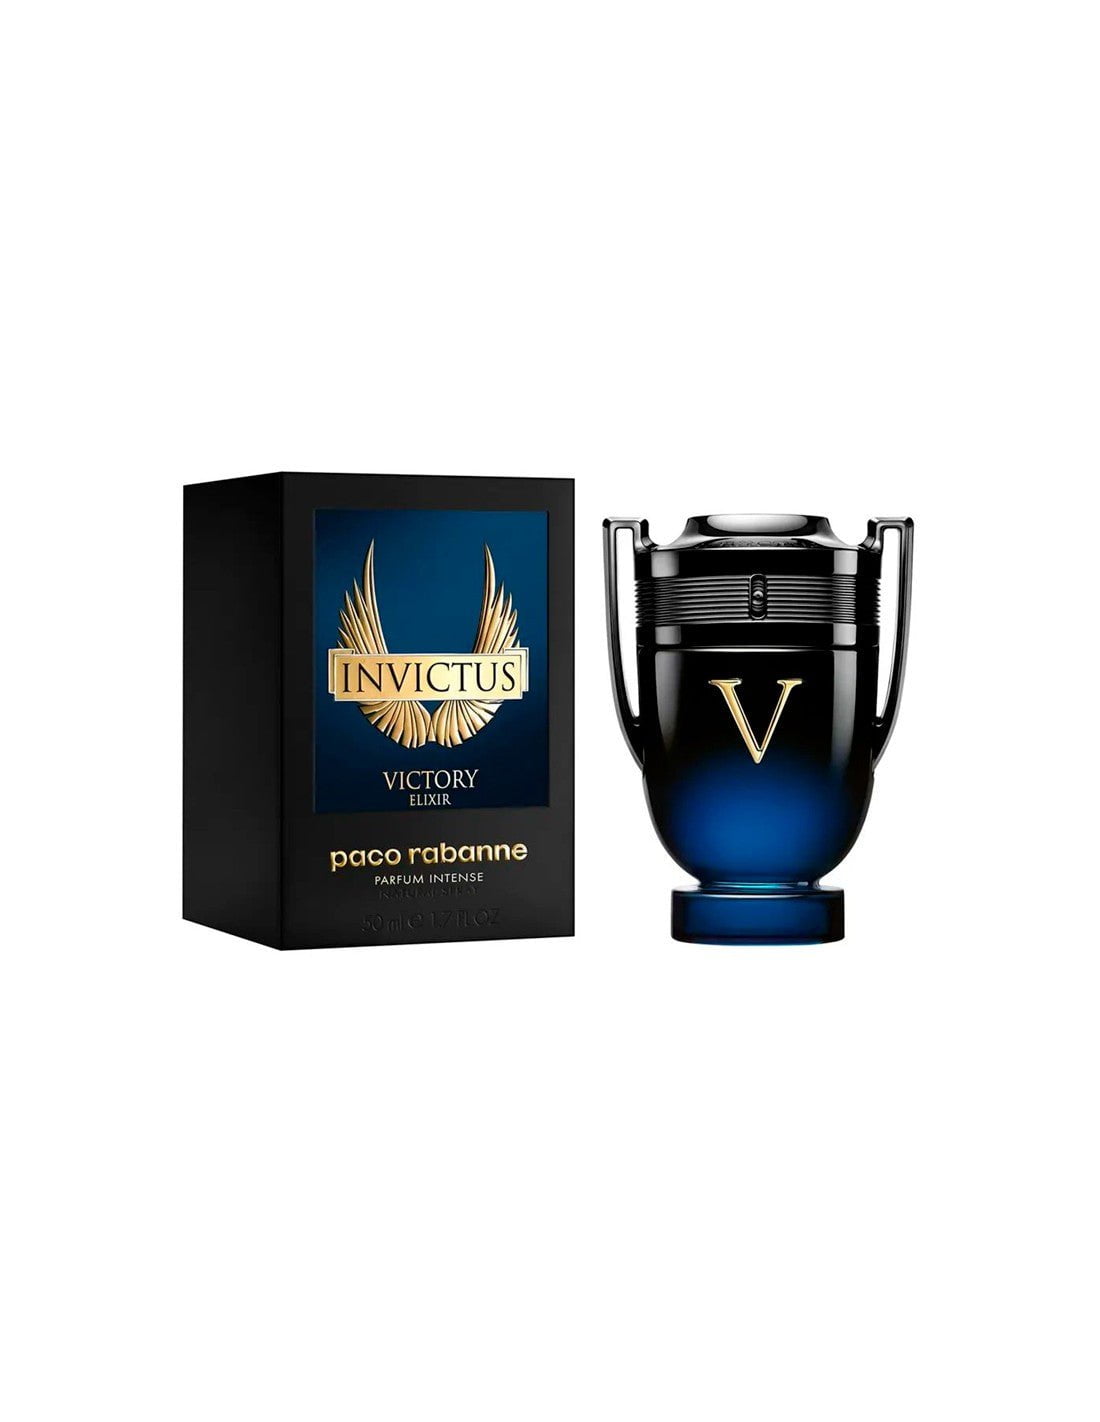 Invictus Victory Elixir Parfum Intense Spray for Men by Paco Rabanne, Product image 1